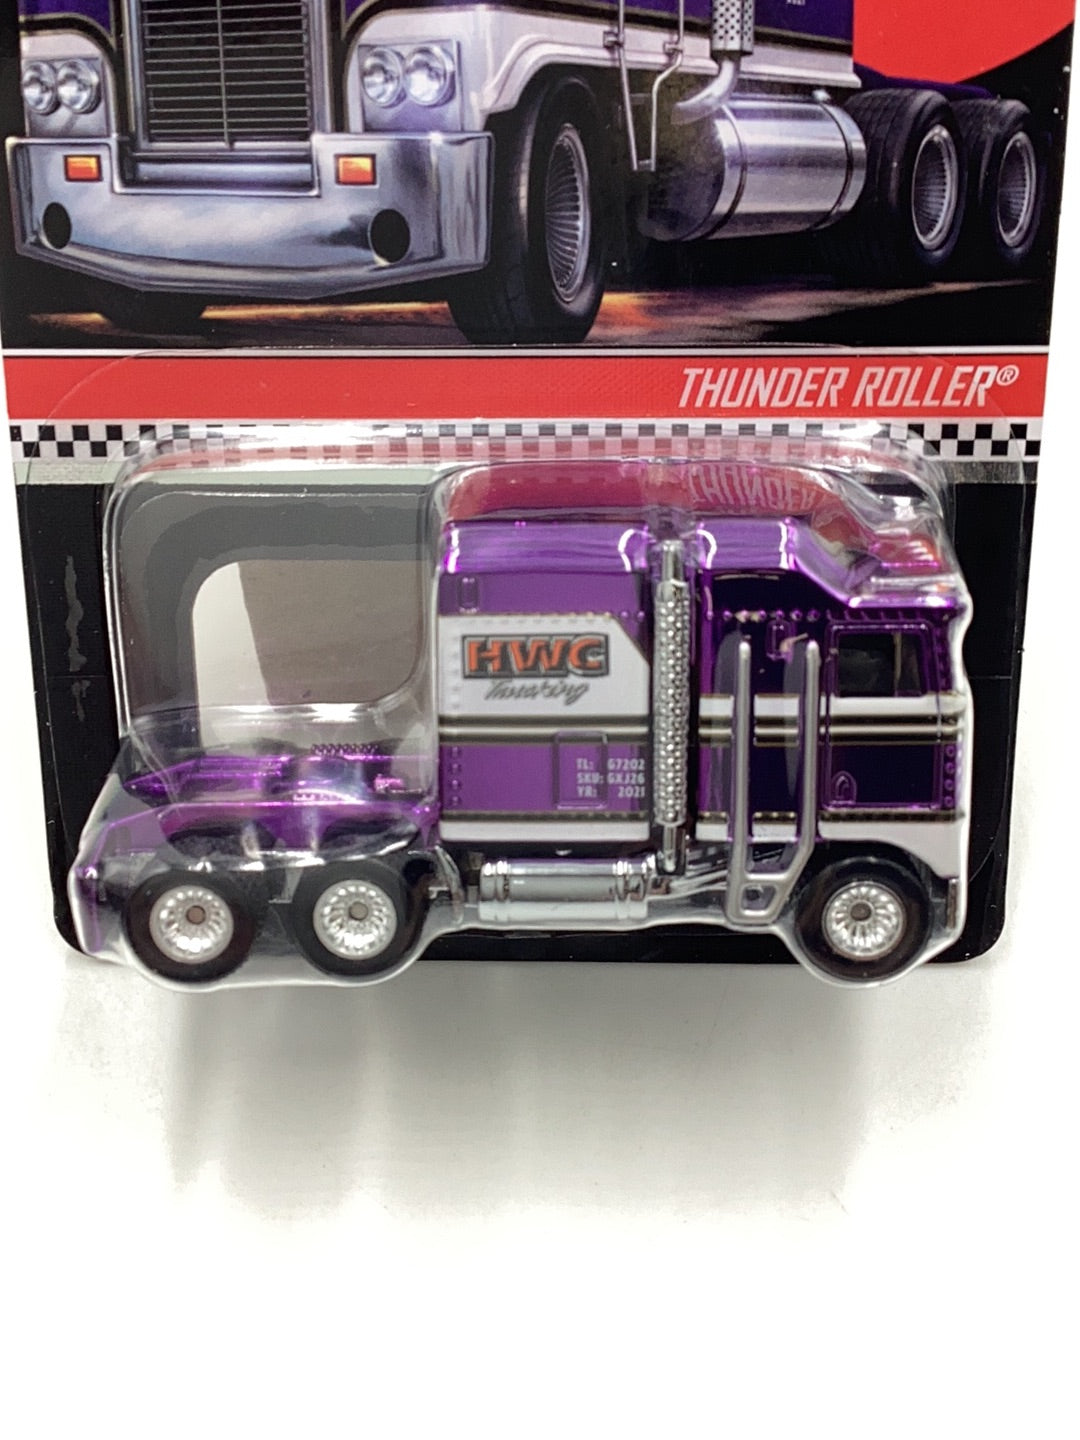 Hot wheels collectors.com Thunder Roller 14485/20000 with protector